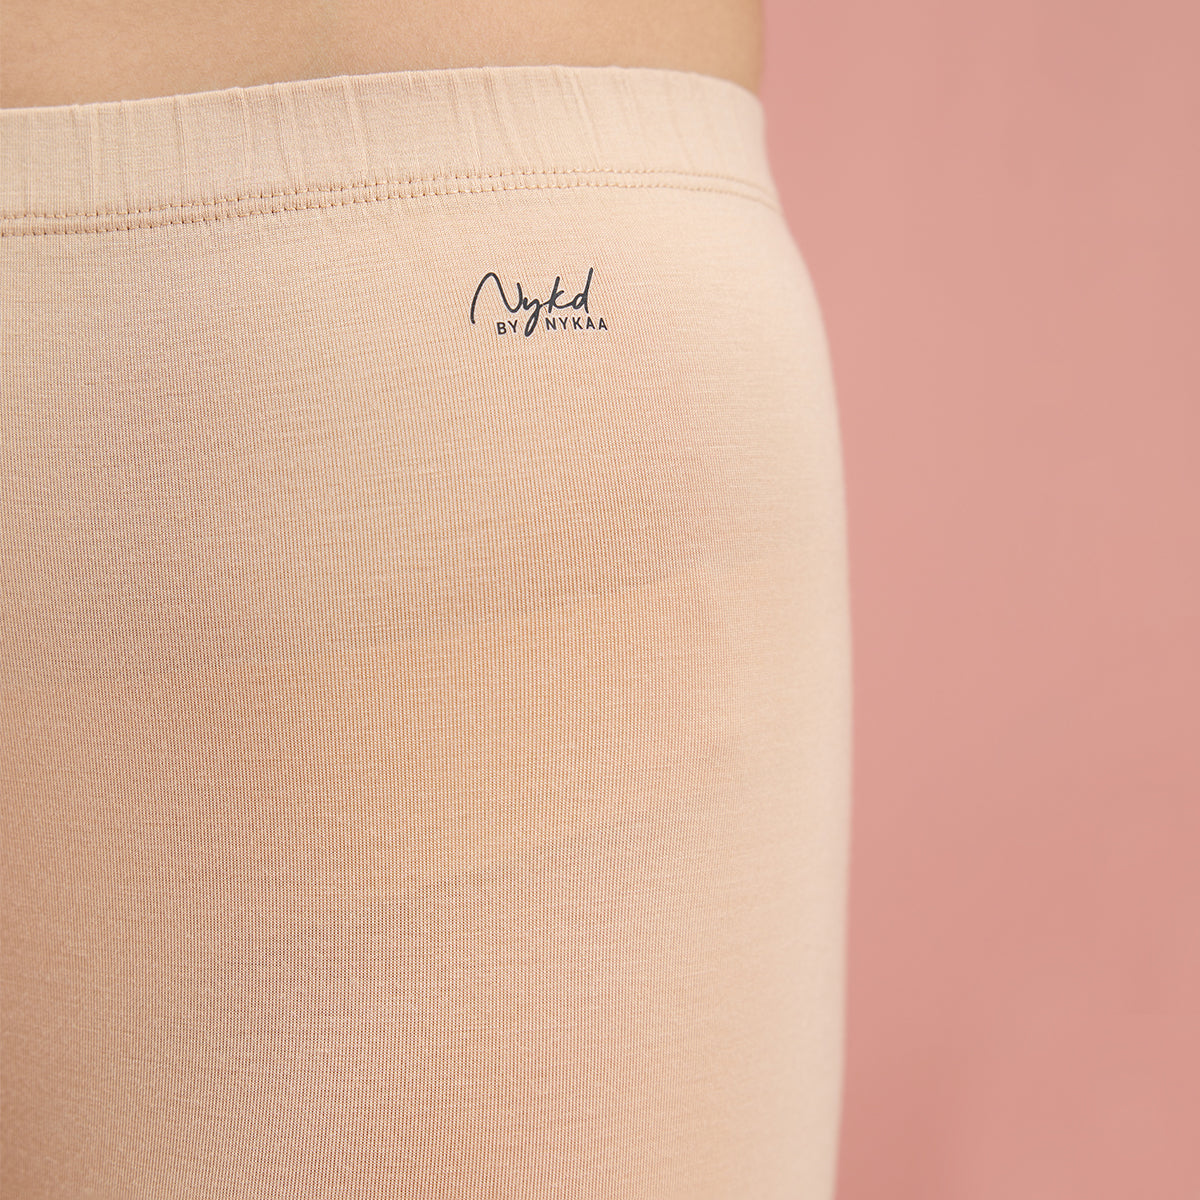 Ultra Light and Soft Thermal Leggings that stay hidden under